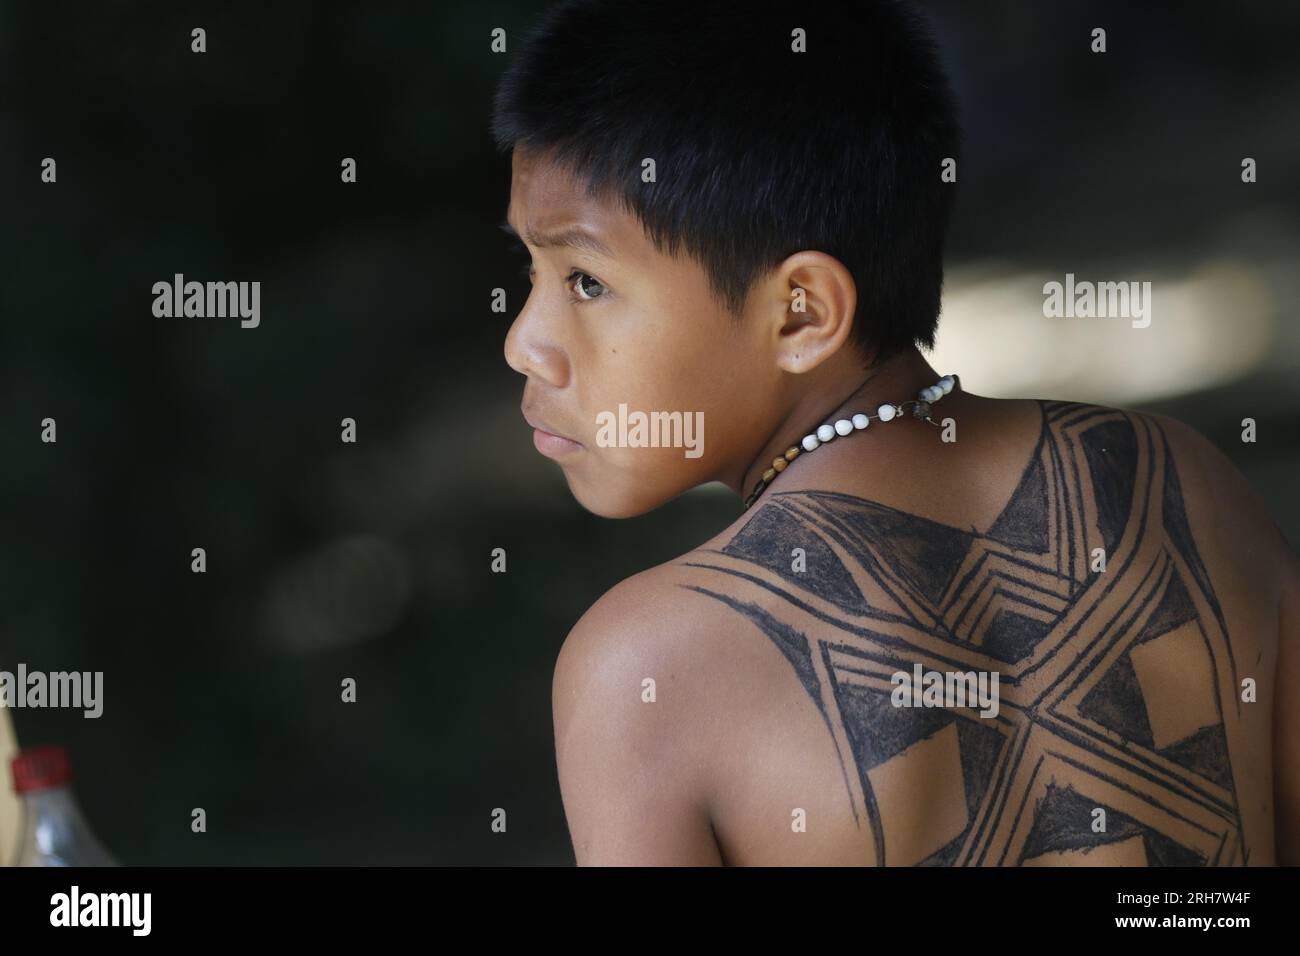 Brazilian indigenous boy portrait with body painted back tatoo with ink. International Day of Indigenous Peoples celebration Stock Photo